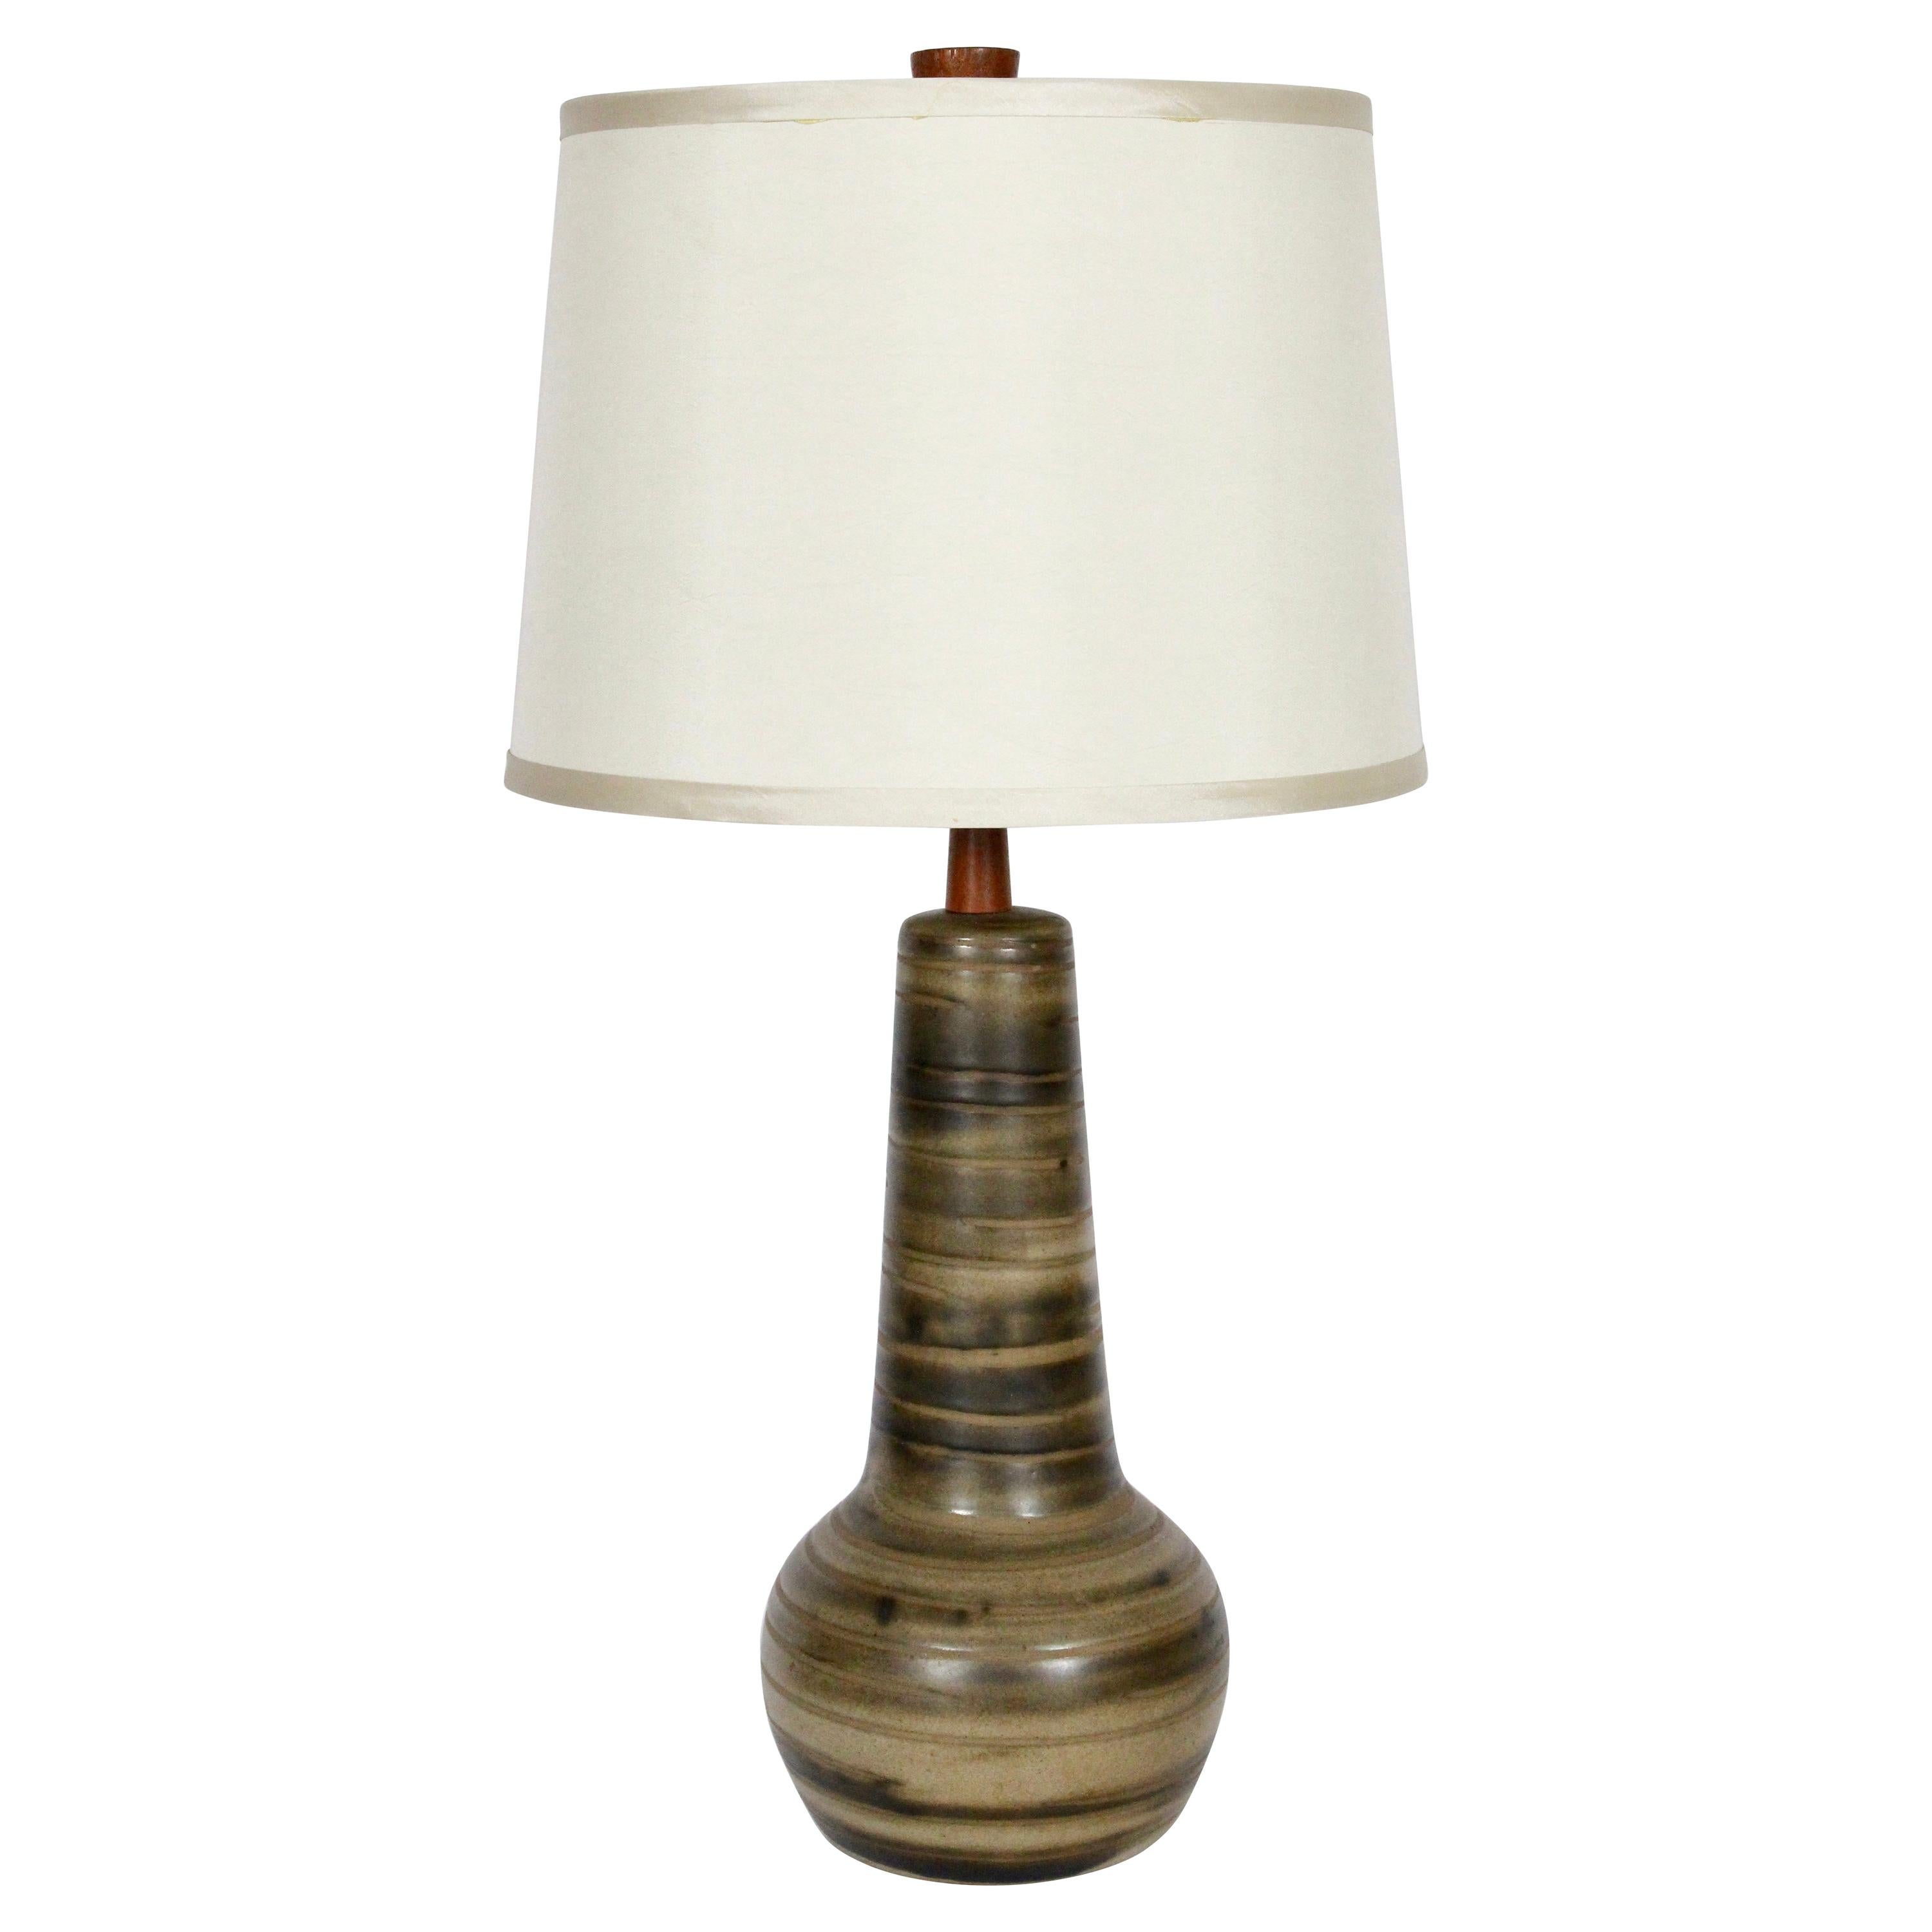 Gordon Martz for Marshall Studios Brushed Olive Green Pottery Table Lamp, 1950's For Sale